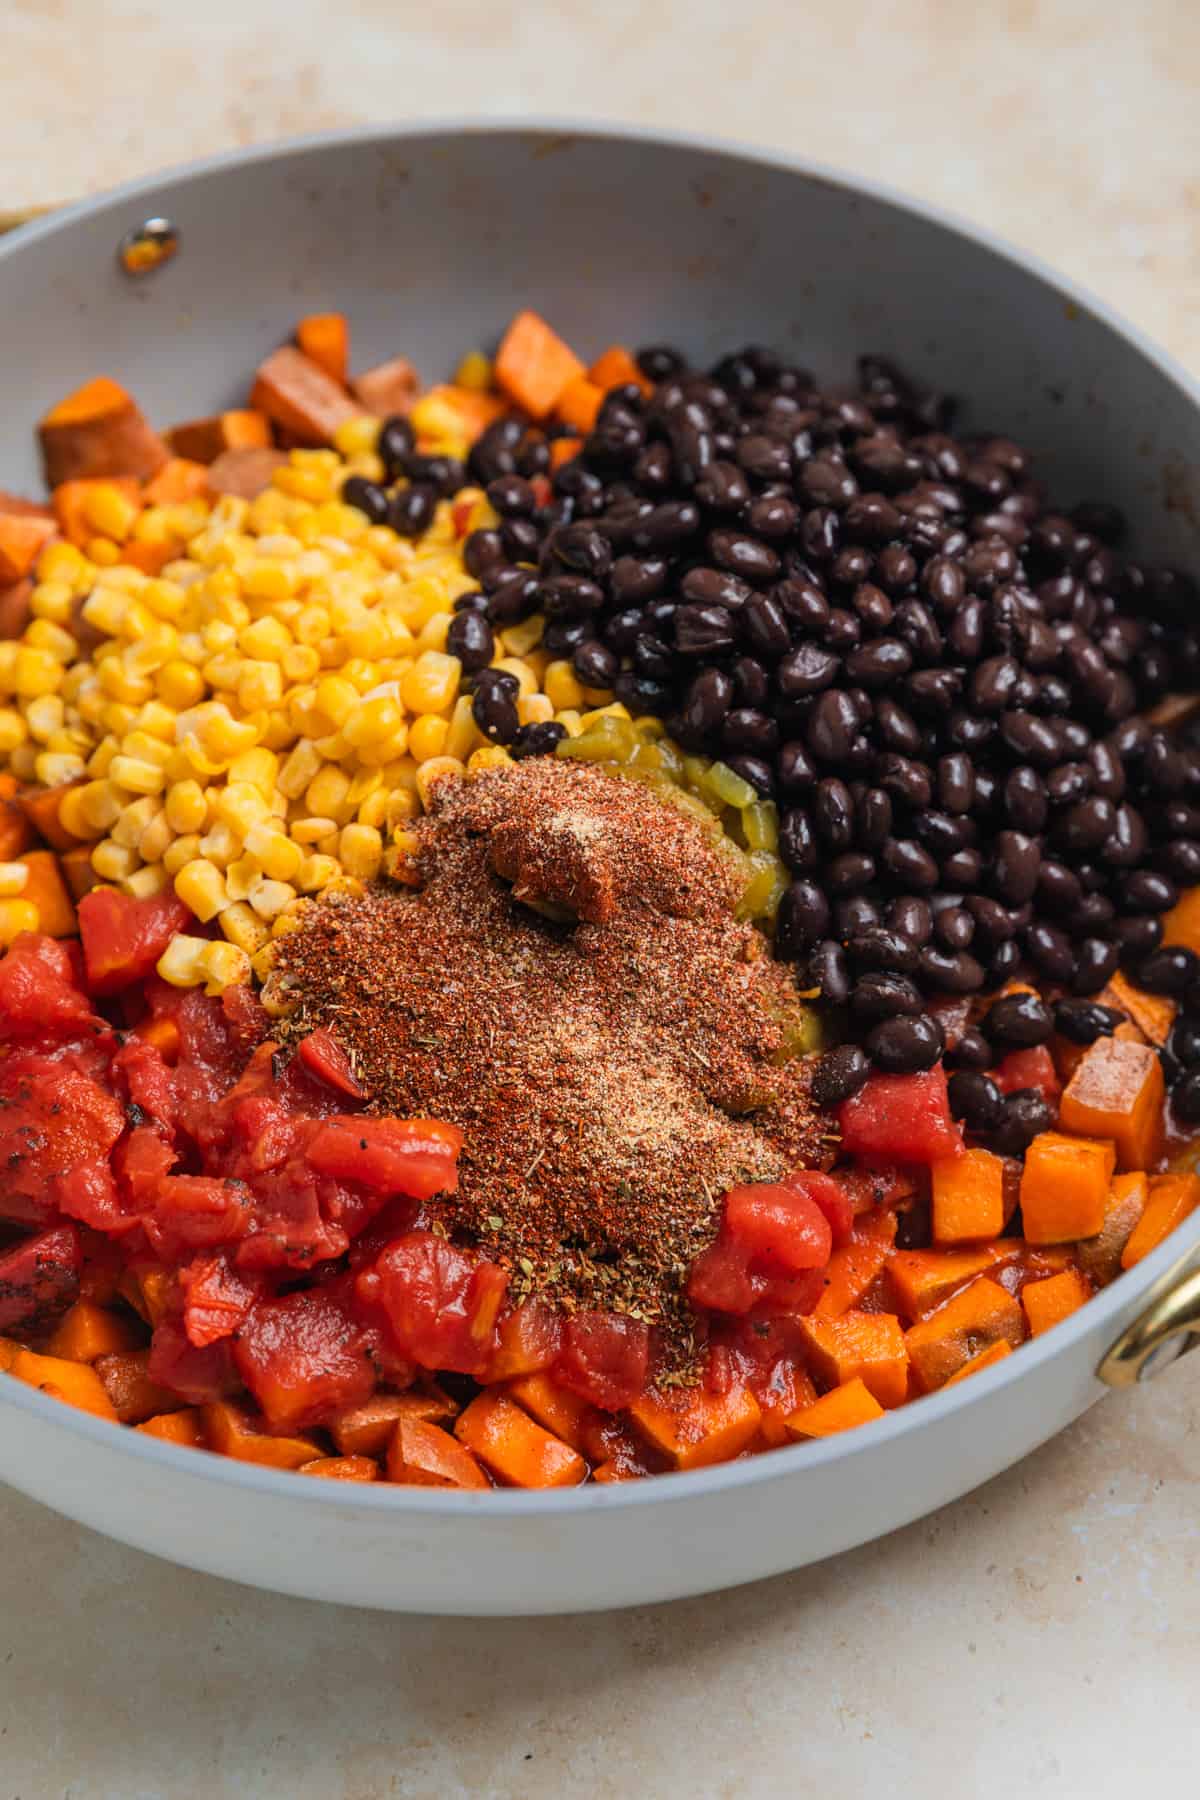 Black beans, corn, tomatoes and seasoning added to skillet with cooked sweet potatoes.